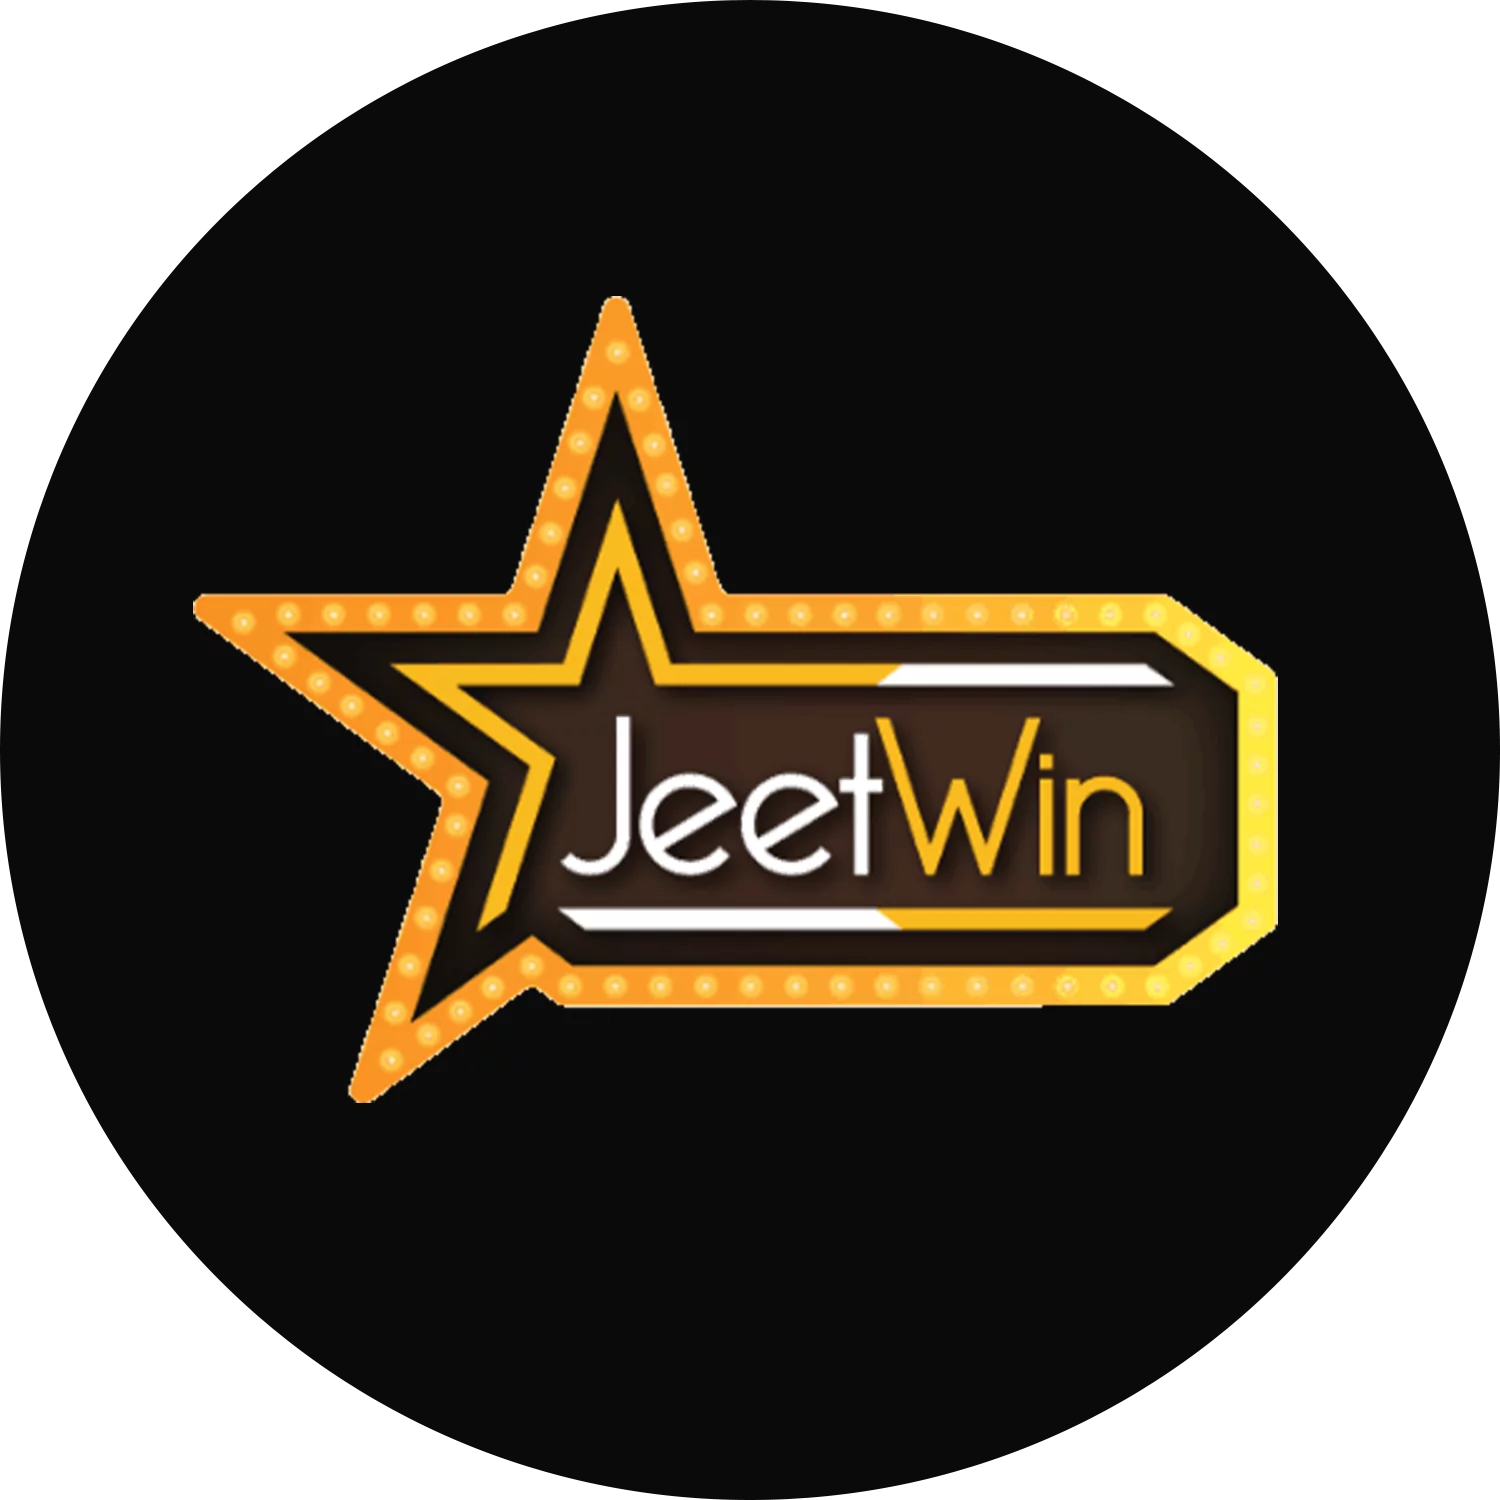 Experience a new level of gambling at the Jeetwin Online Casino.